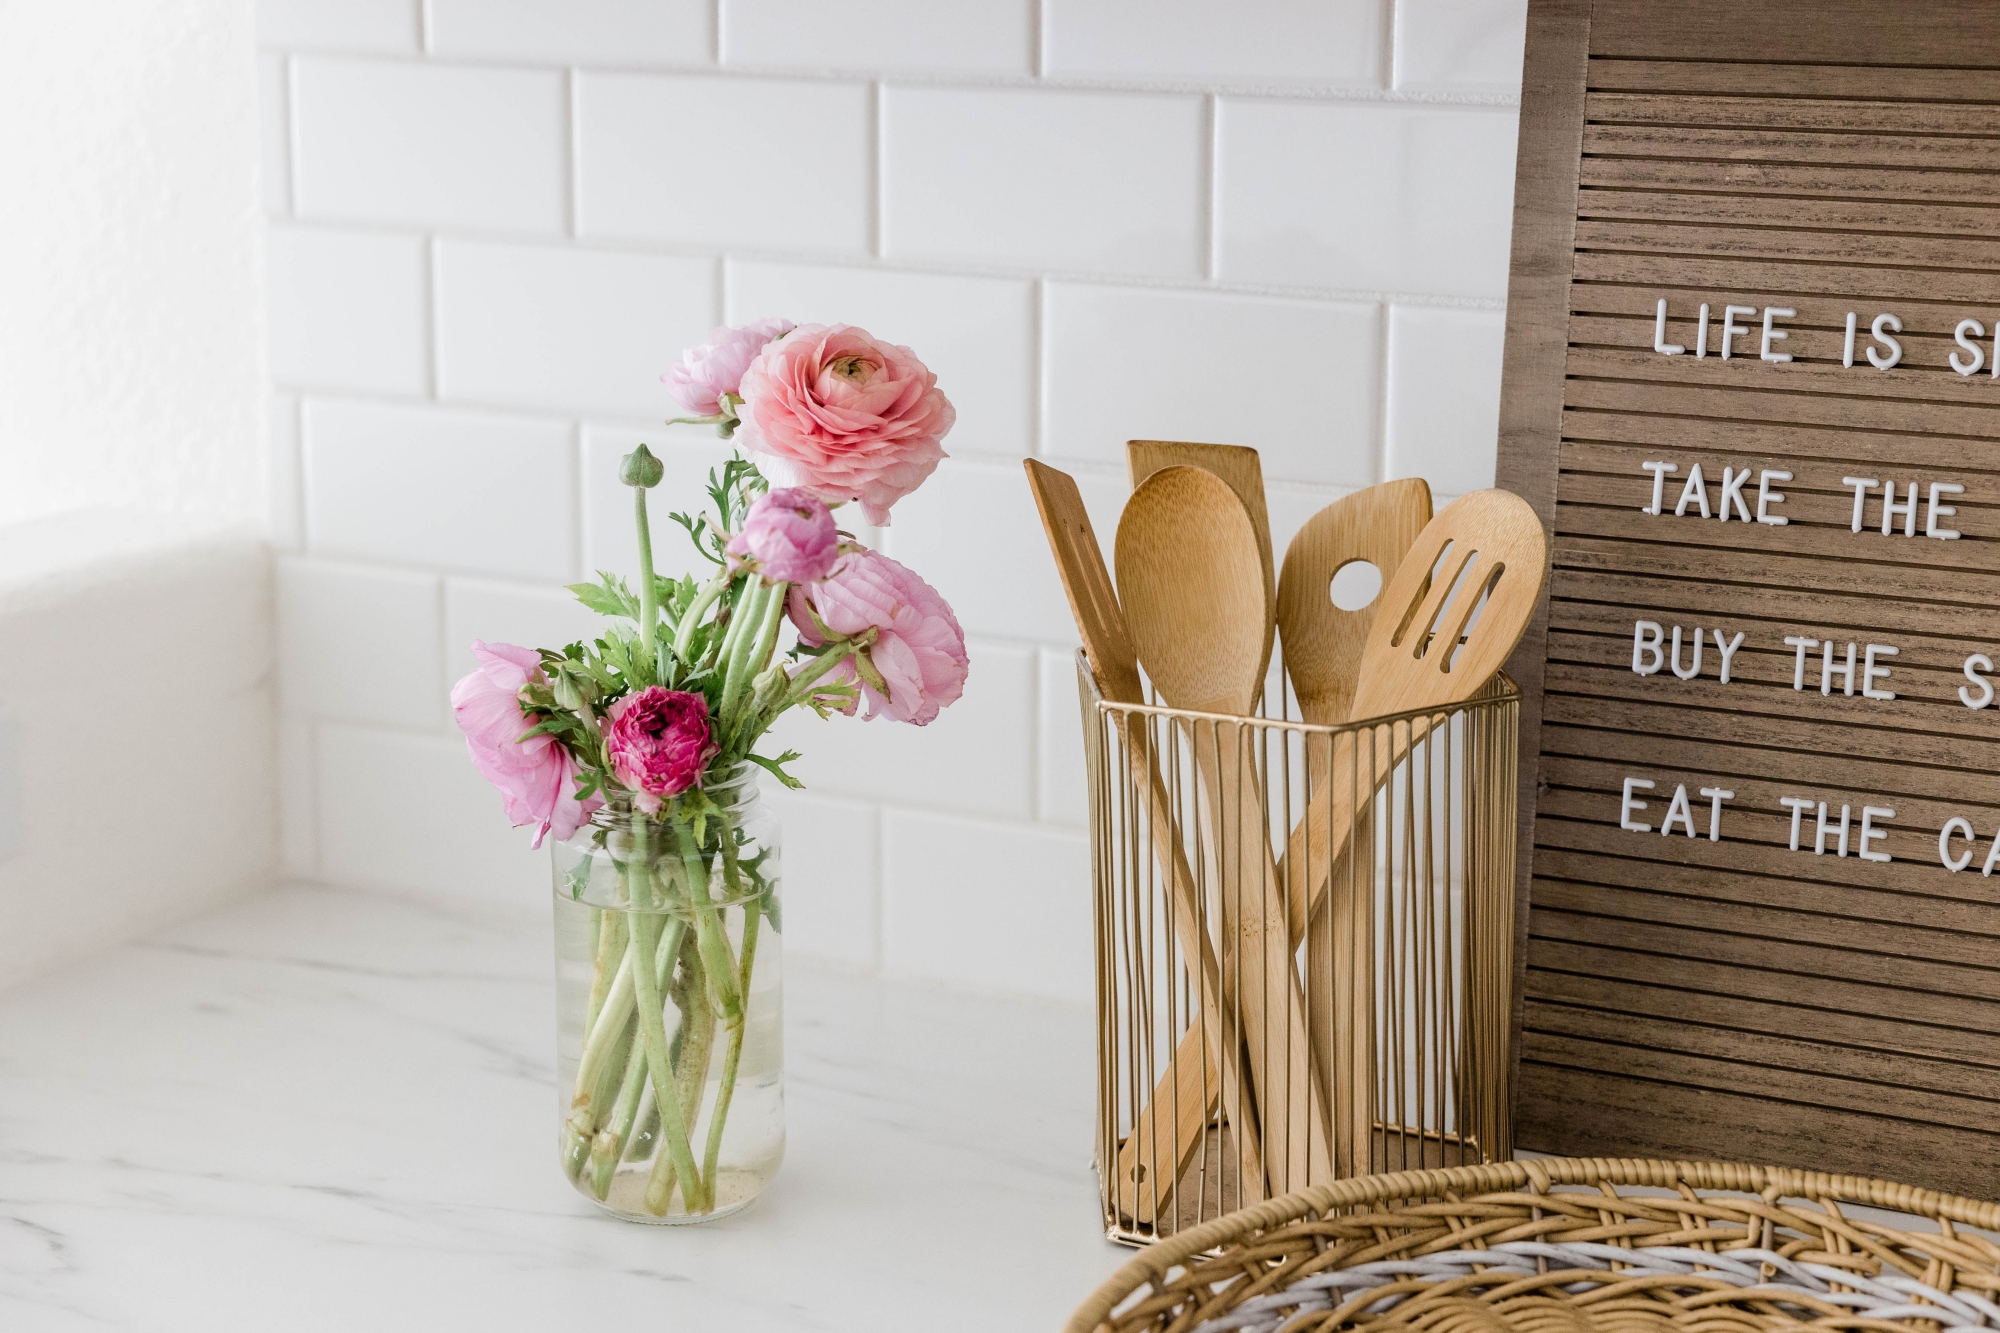 Flowers and kitchen utensils on a contertop